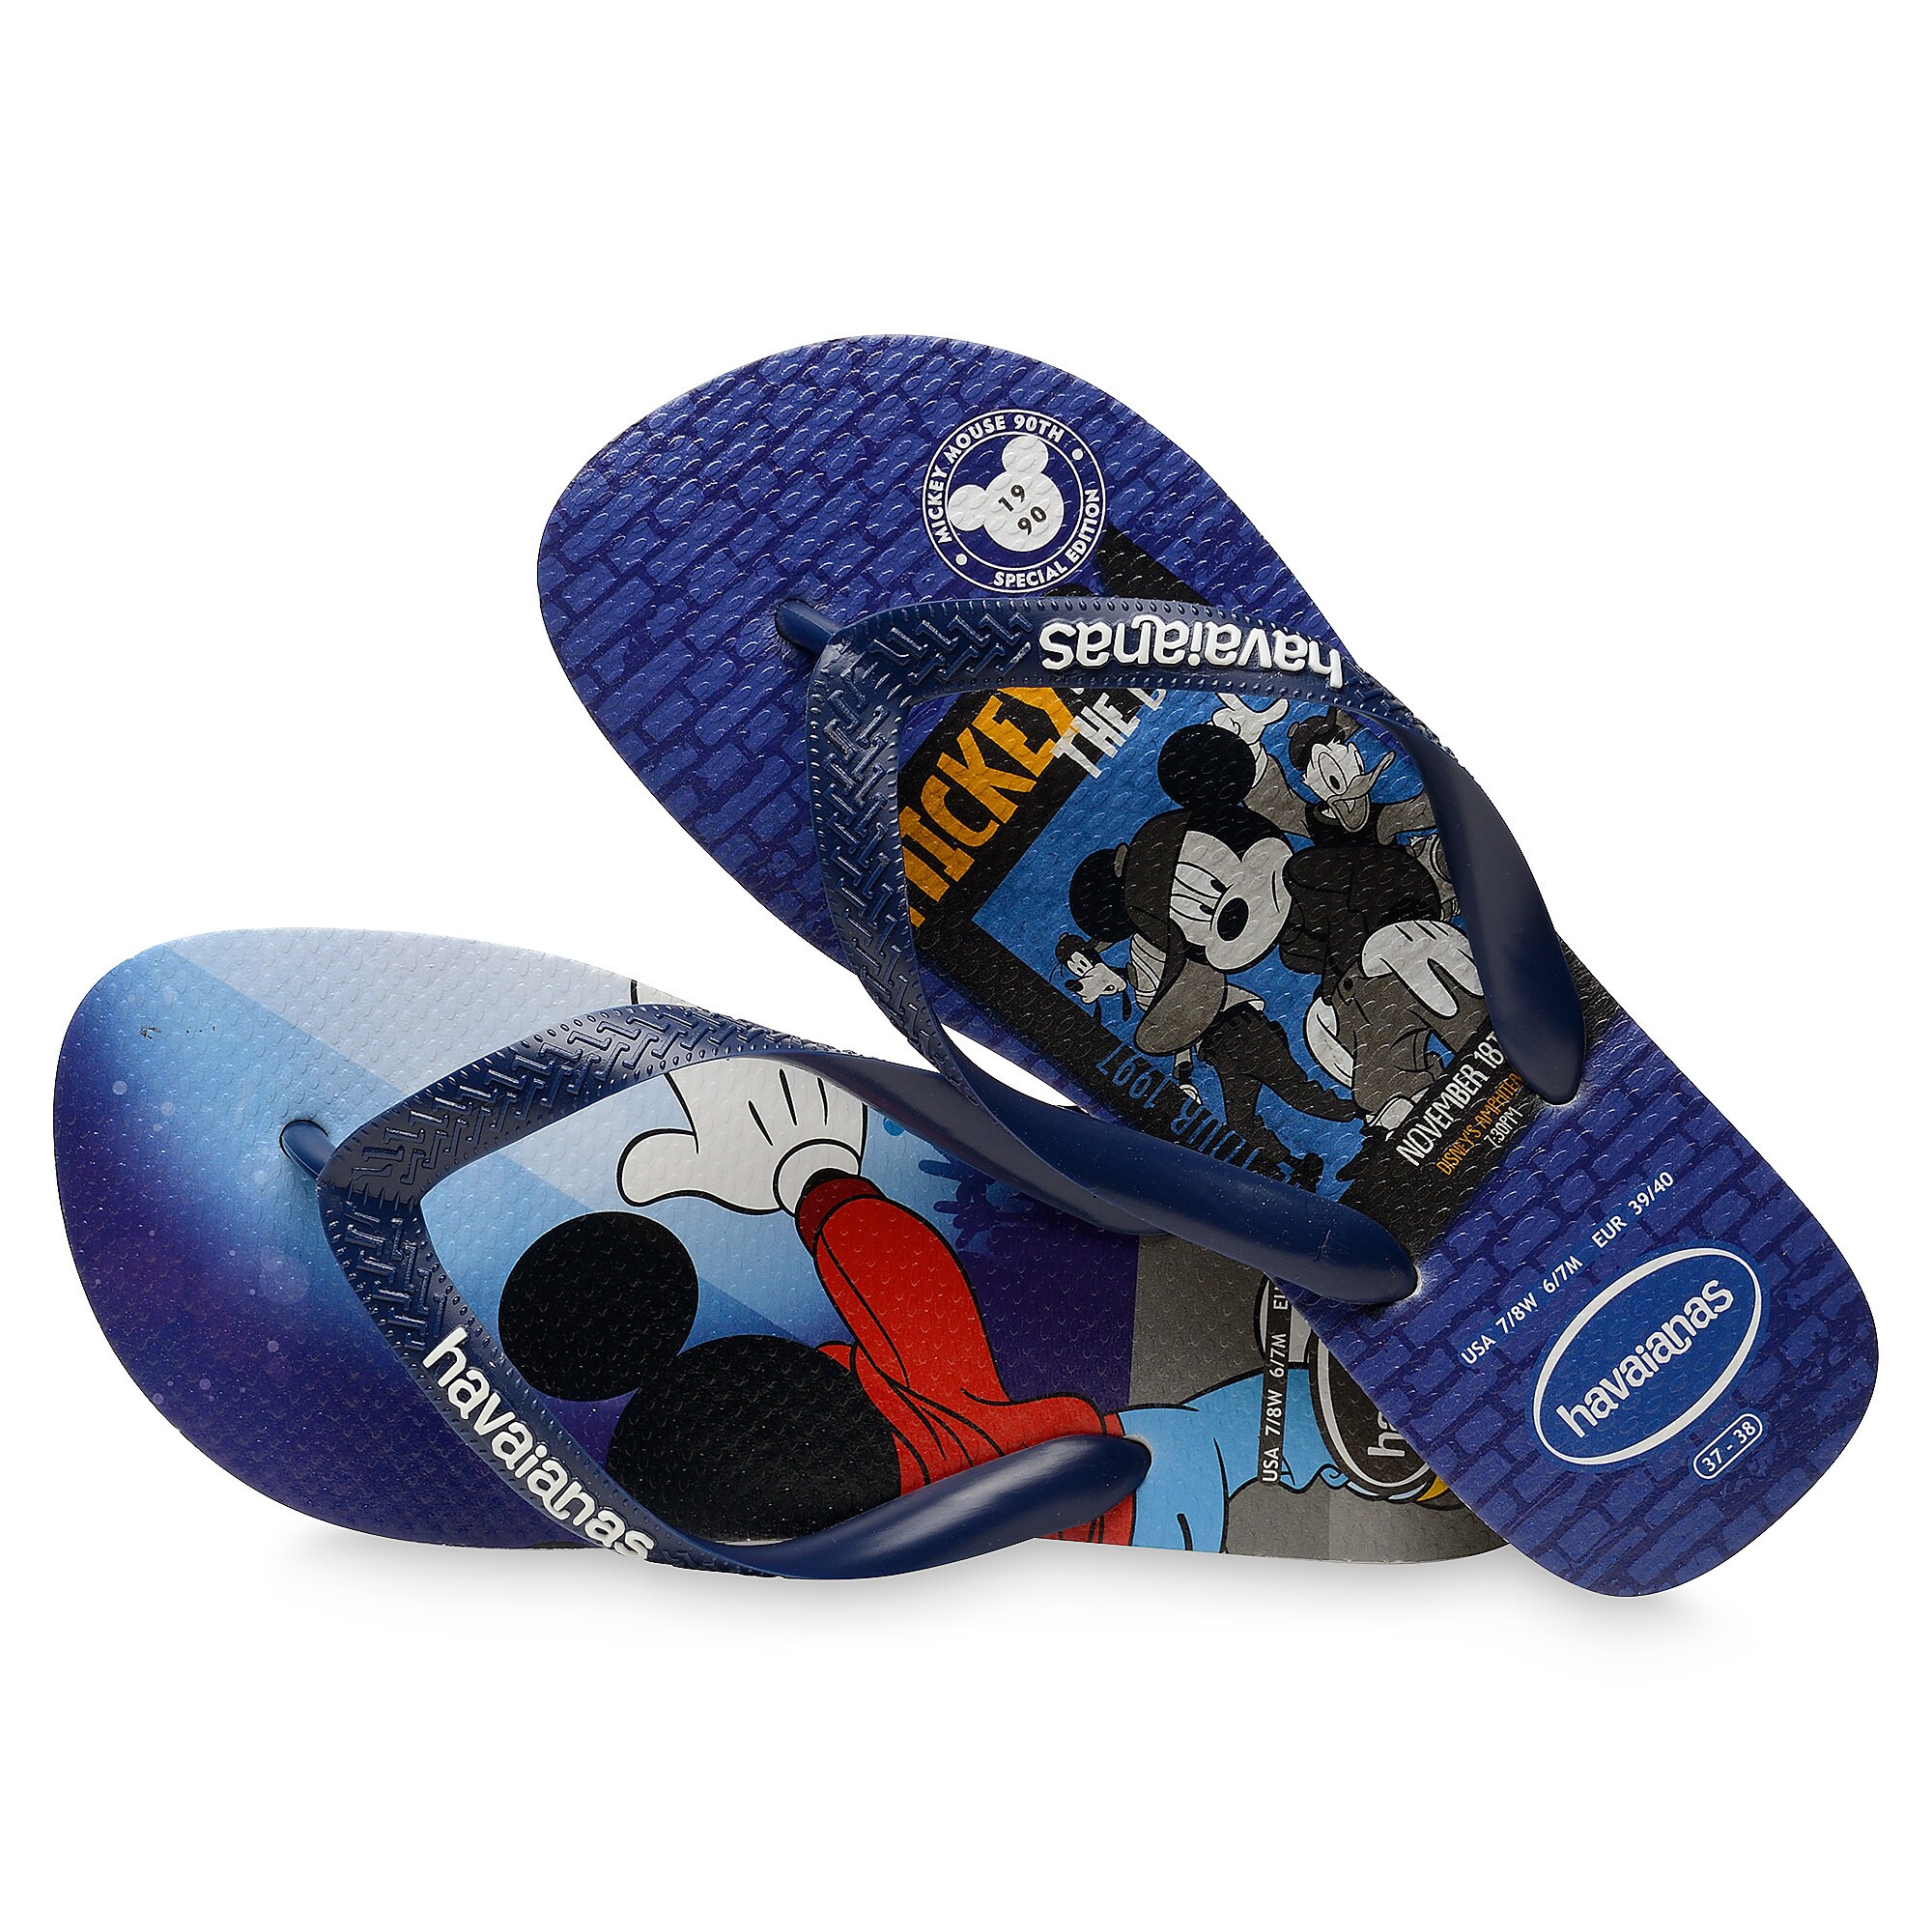 Mickey Mouse and Friends Boy Bands Flip Flops for Adults by Havaianas - 1990s